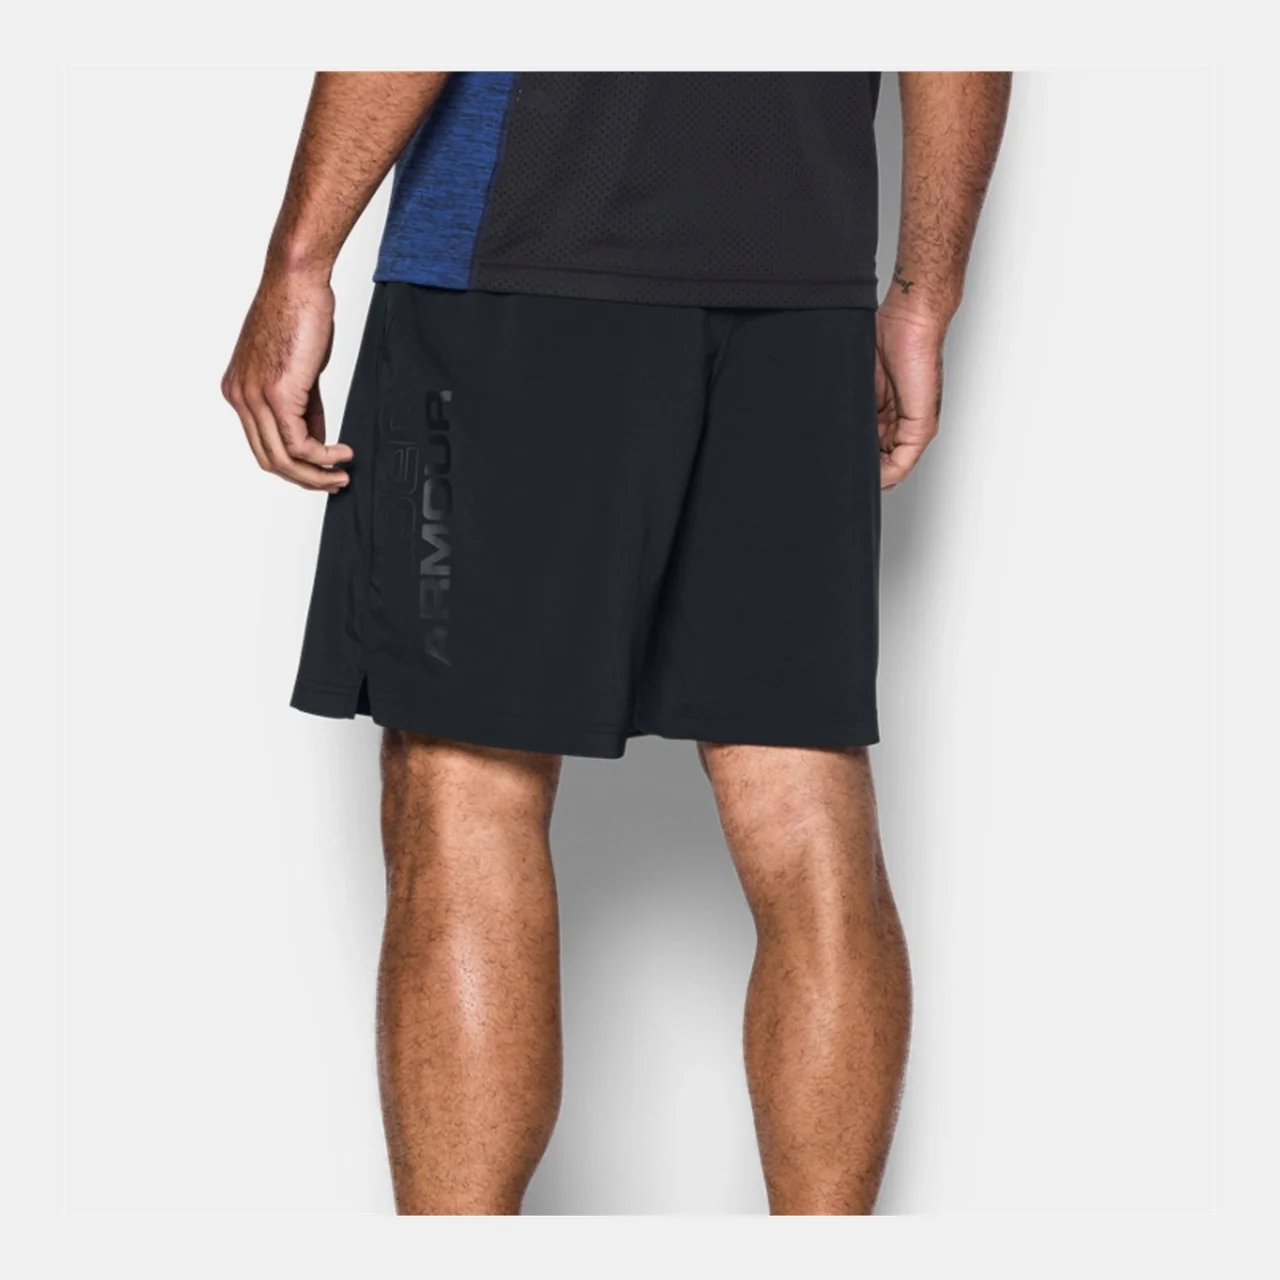 Under Armour Mirage Short 8" All Black Size S